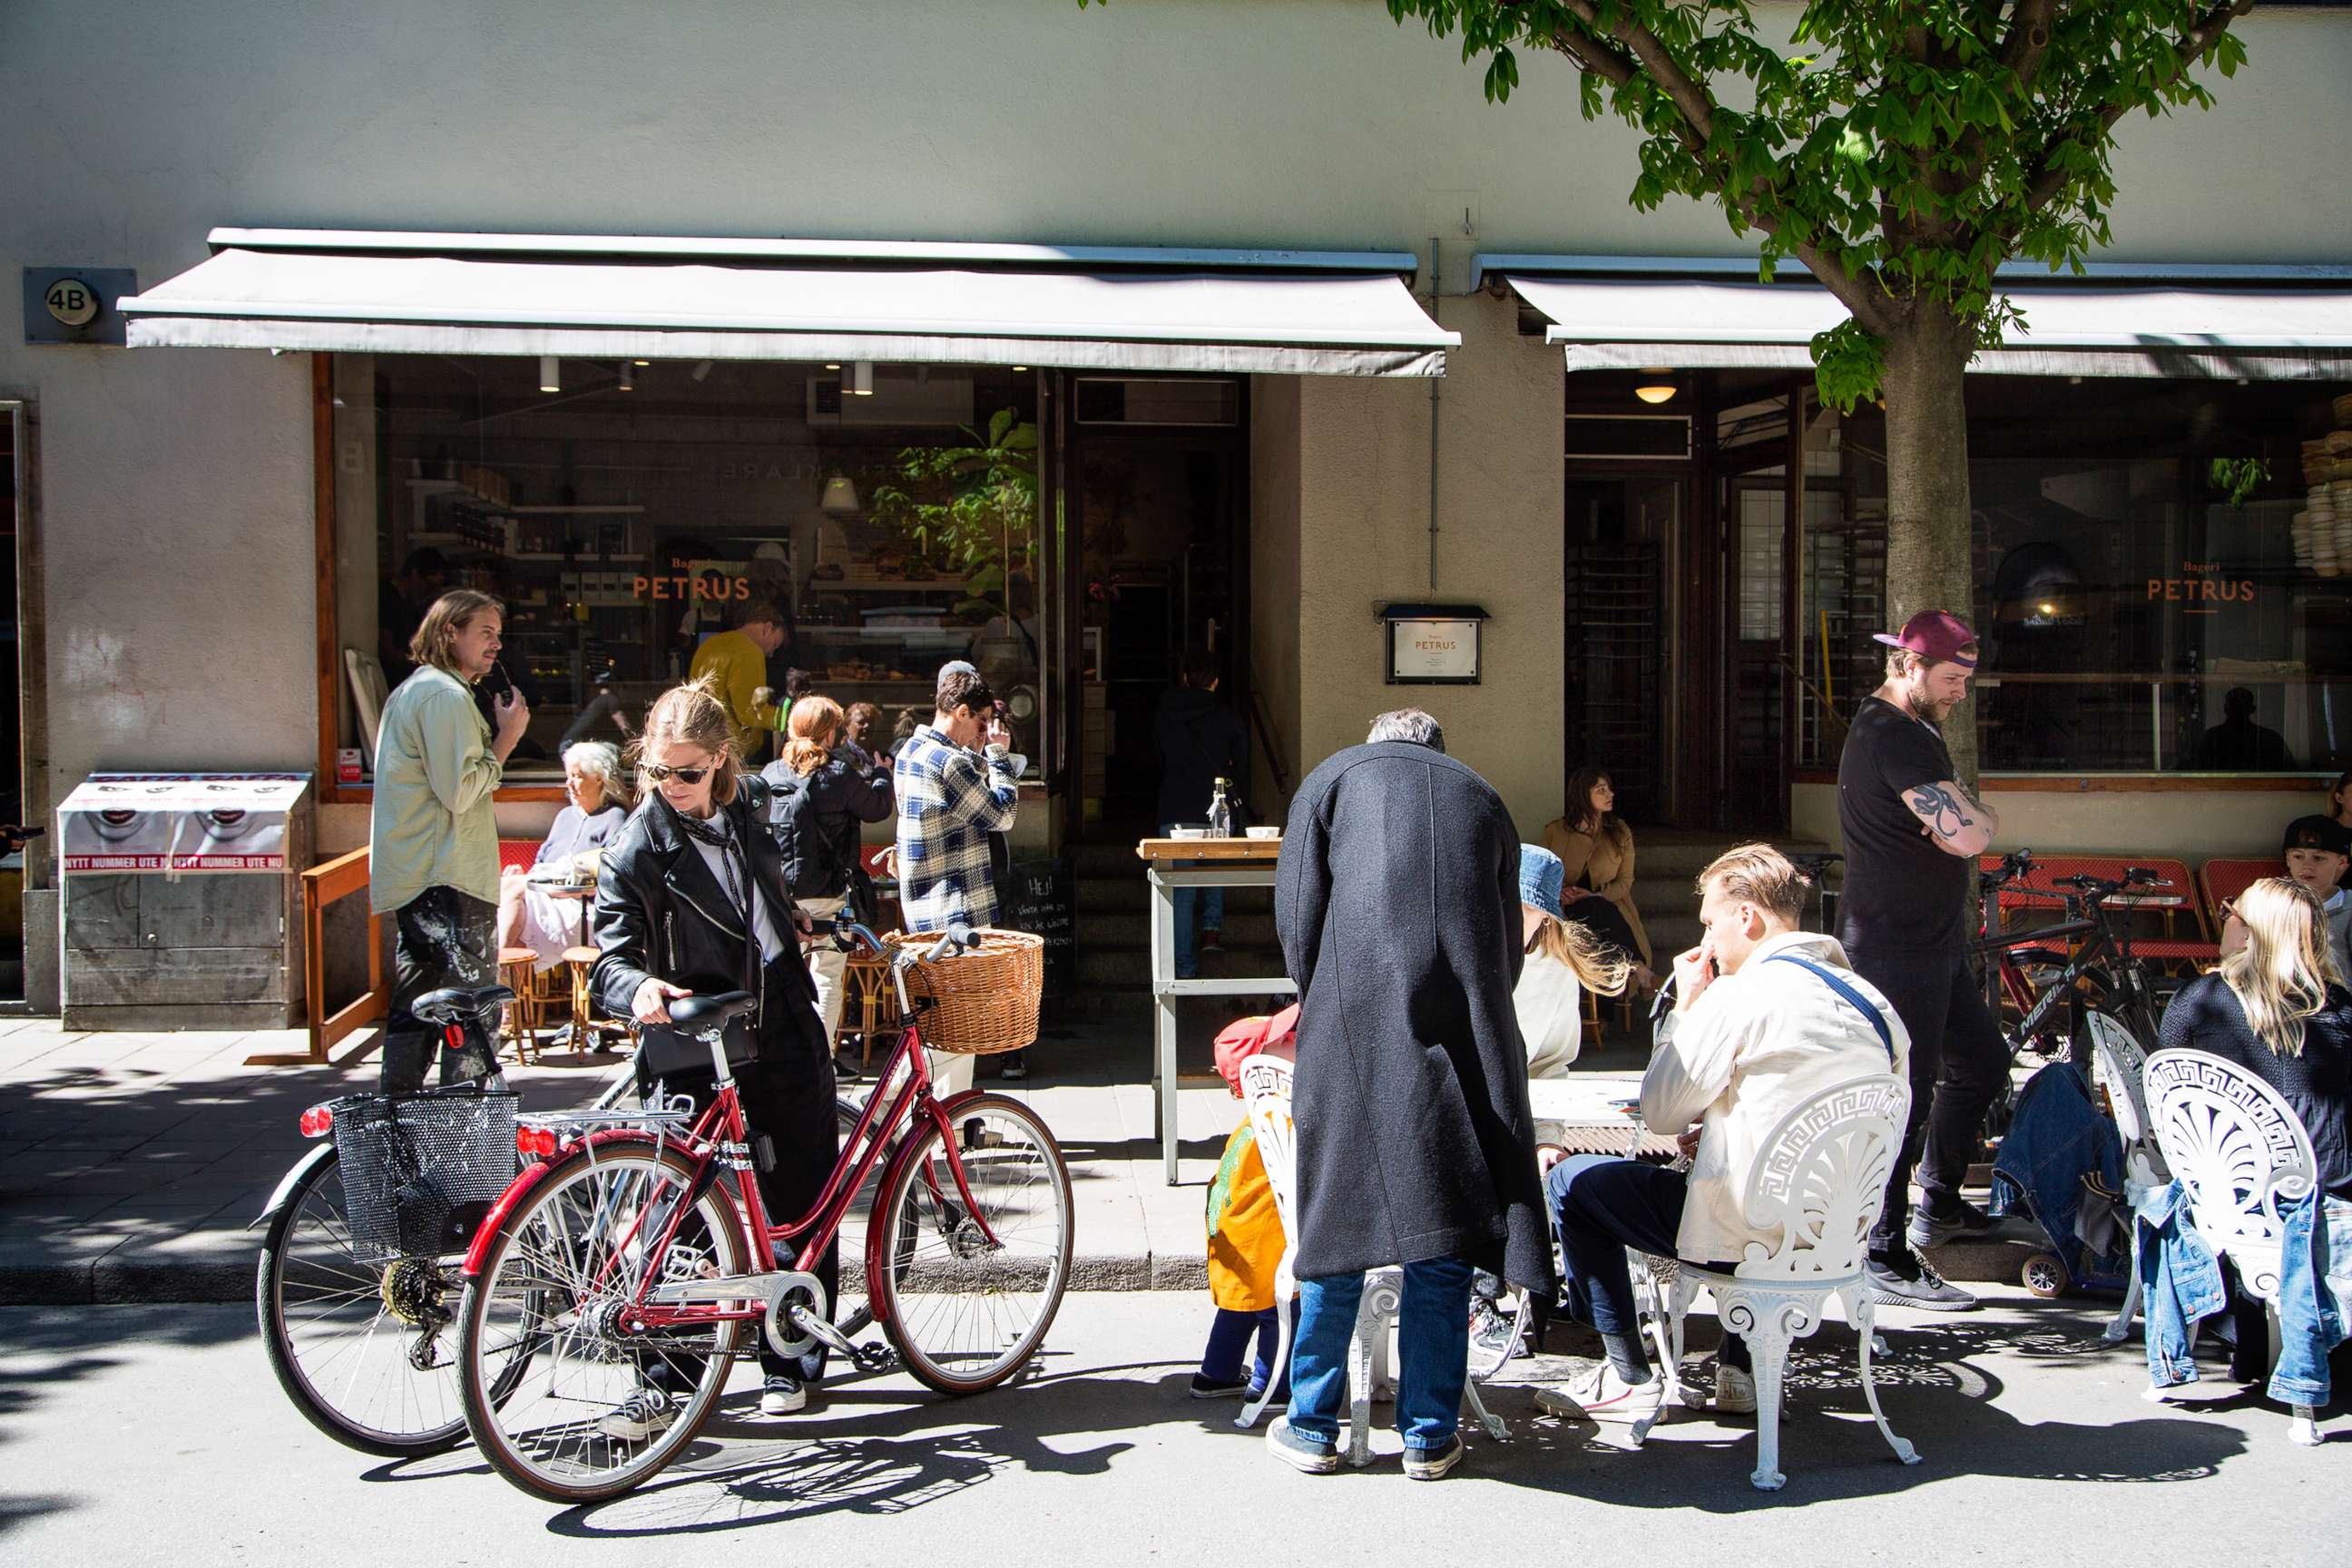 PHOTO: CCustomers gather at terraced tables outside a cafe in Stockholm, Sweden, May 22, 2020.